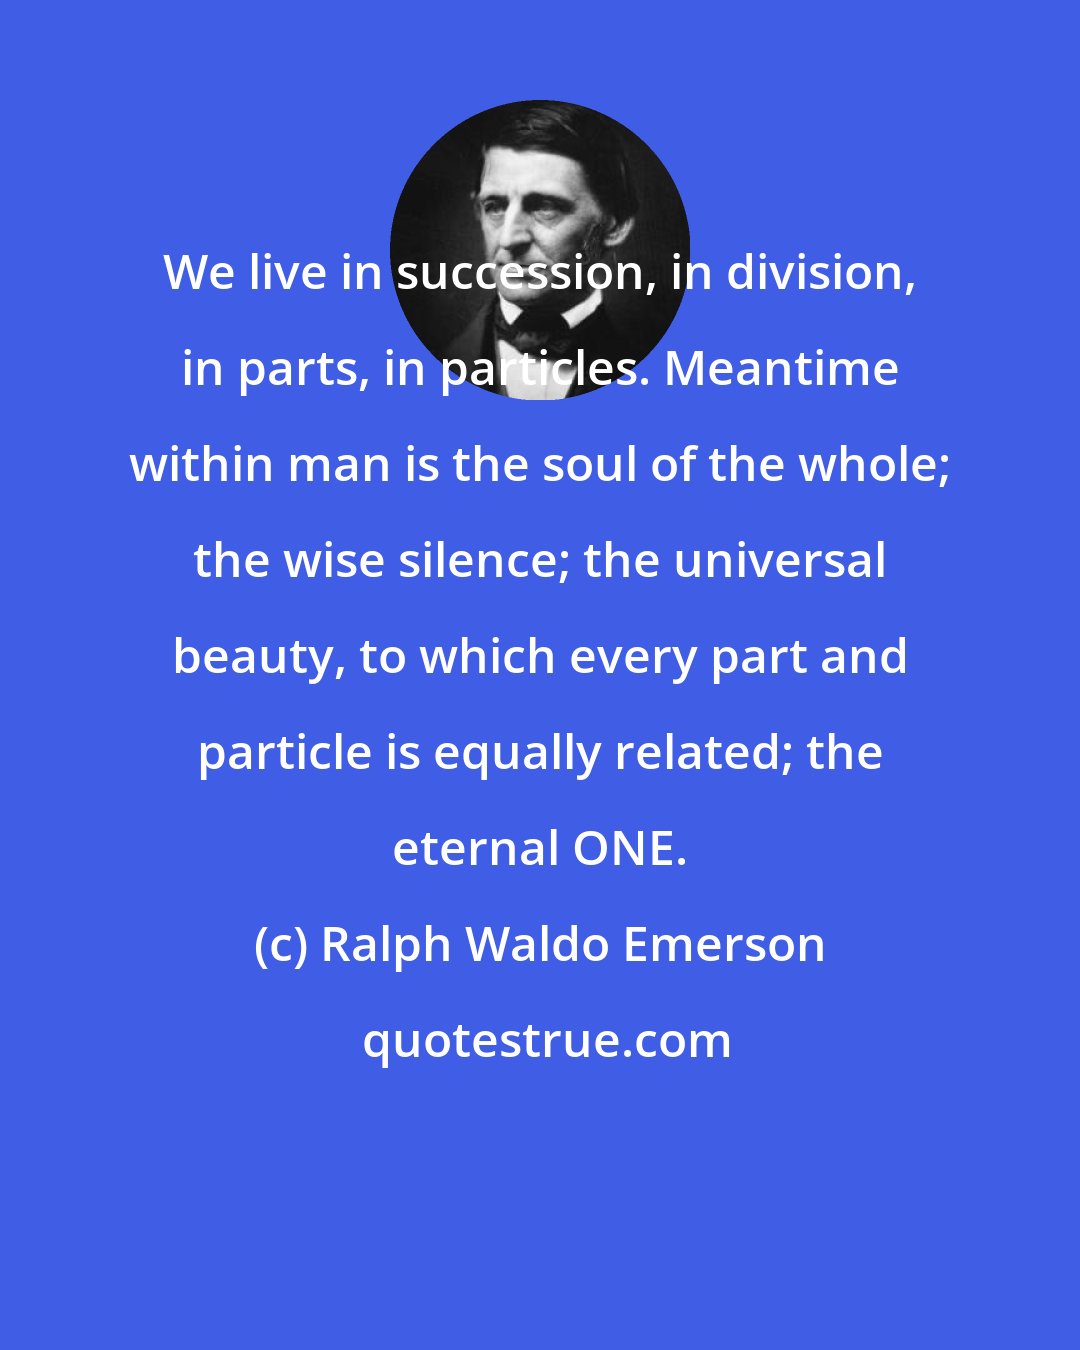 Ralph Waldo Emerson: We live in succession, in division, in parts, in particles. Meantime within man is the soul of the whole; the wise silence; the universal beauty, to which every part and particle is equally related; the eternal ONE.